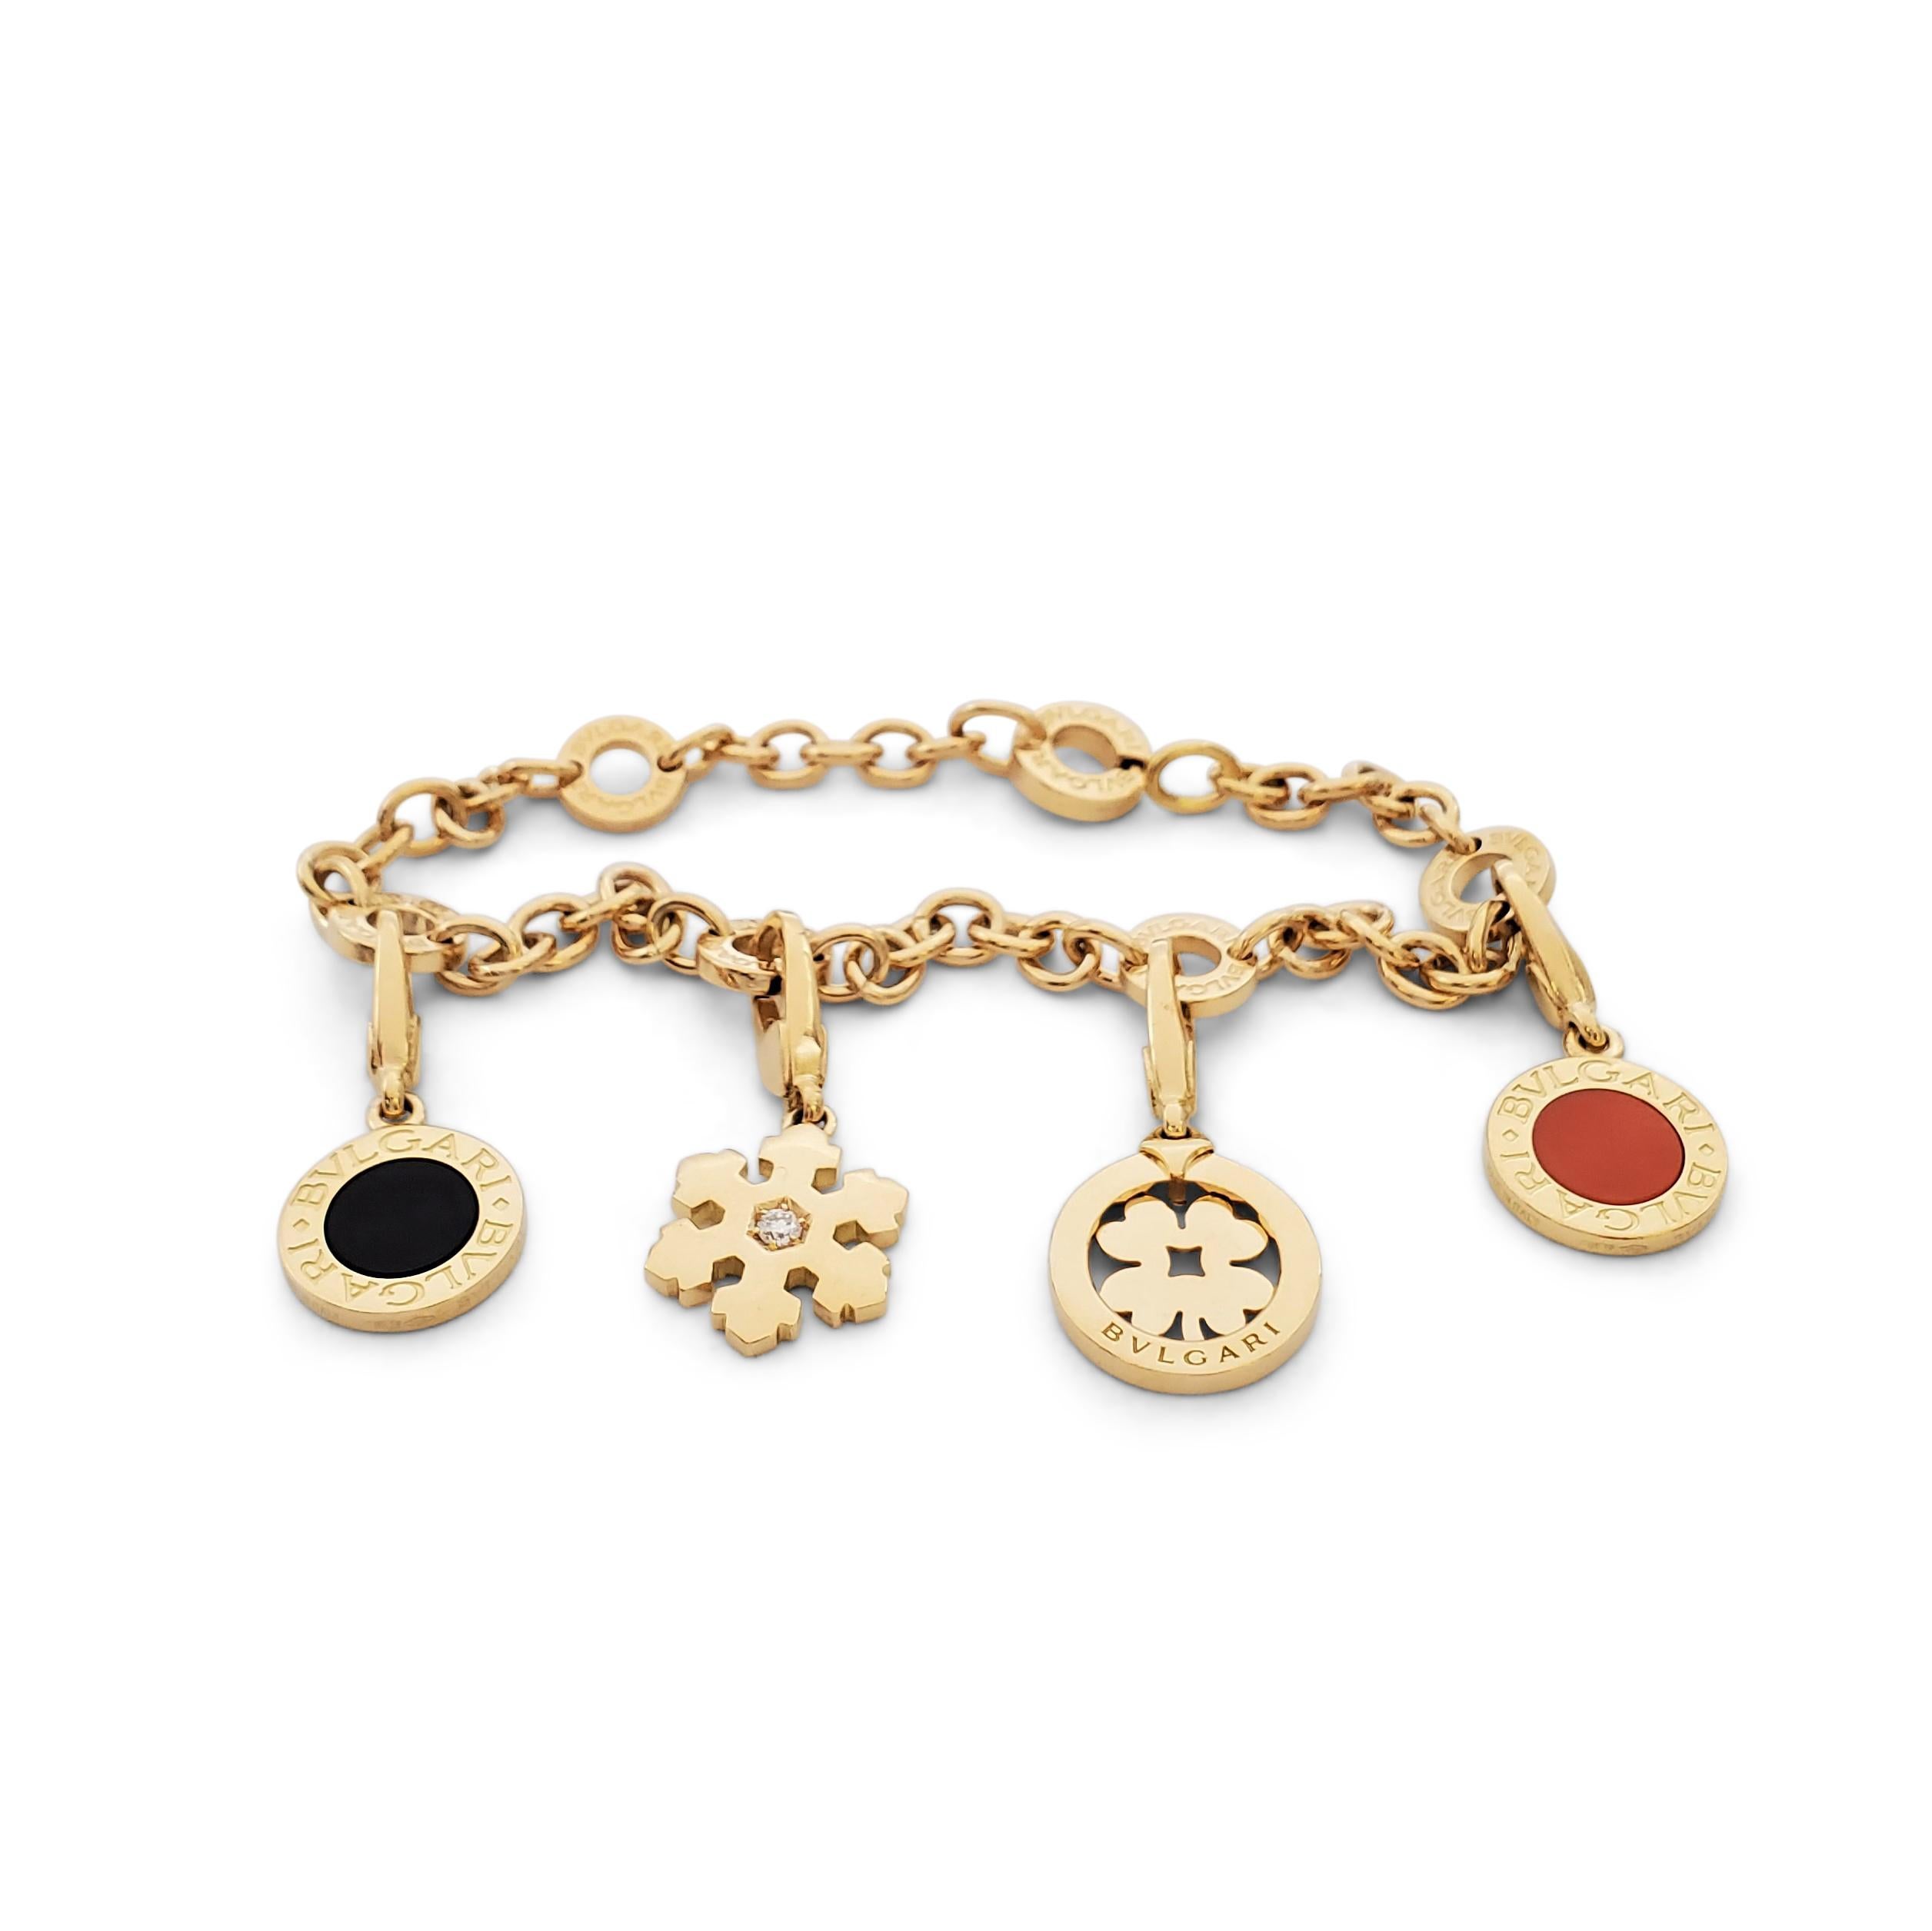 Authentic Bvlgari bracelet crafted in 18 karat yellow gold featuring four detachable charms that can be worn separately as pendants. Signed Bvlgari, Made in Italy, 750, with serial number. The bracelet measures 7 1/2 inches in length. Not presented